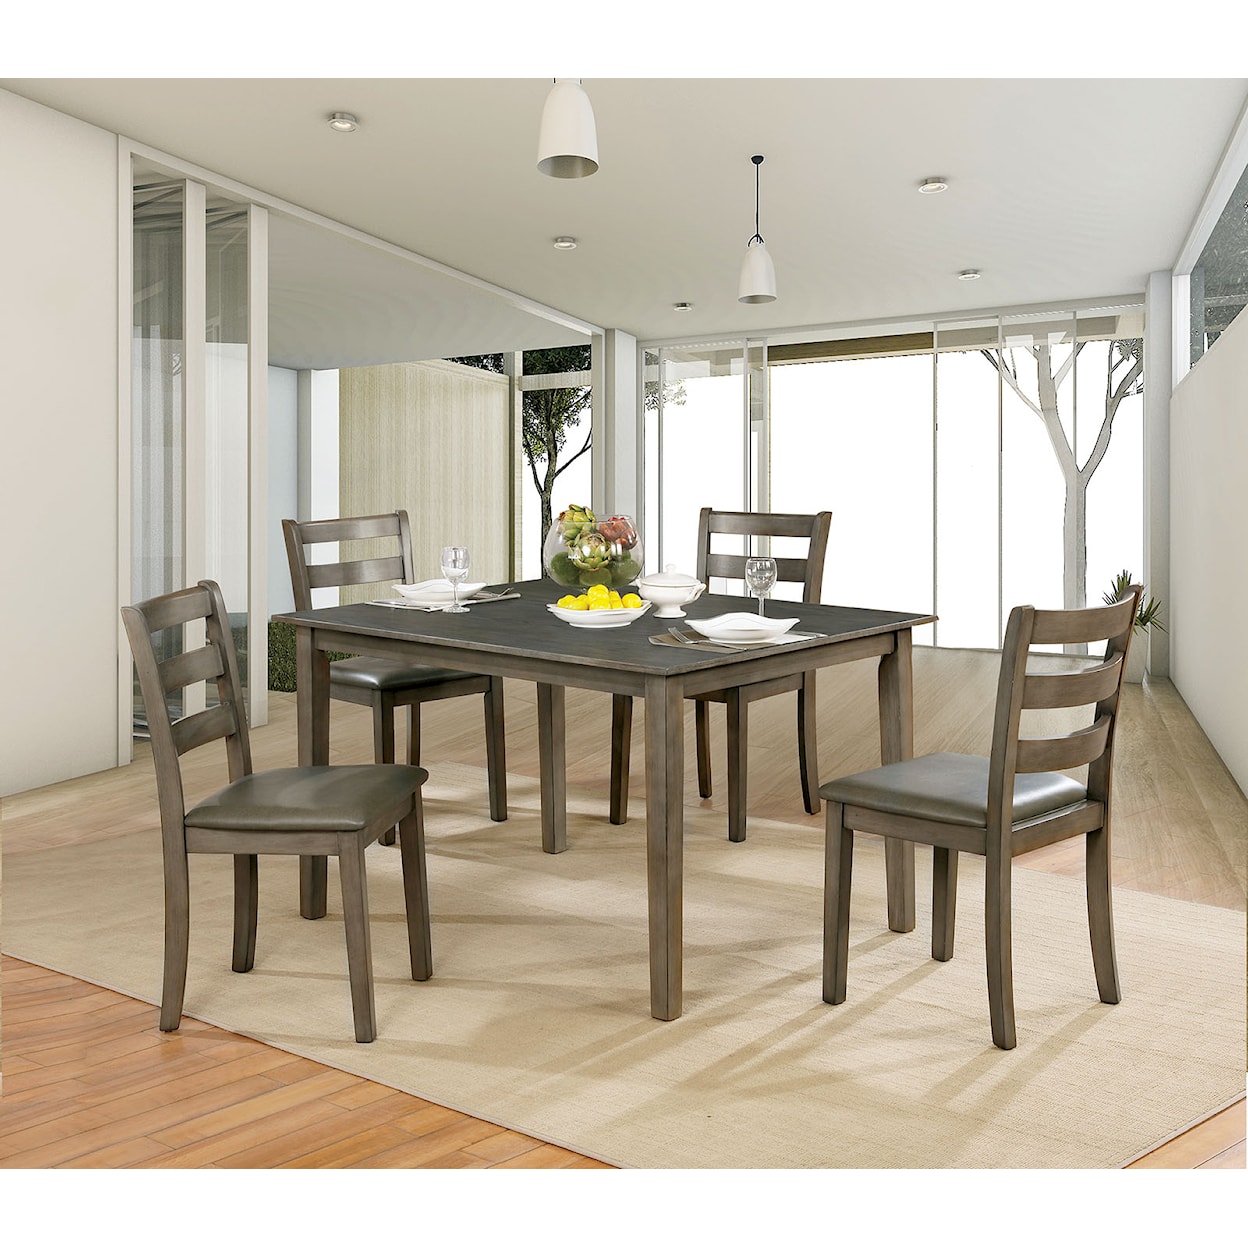 FUSA Marcelle 5 Pc. Dining Table Set